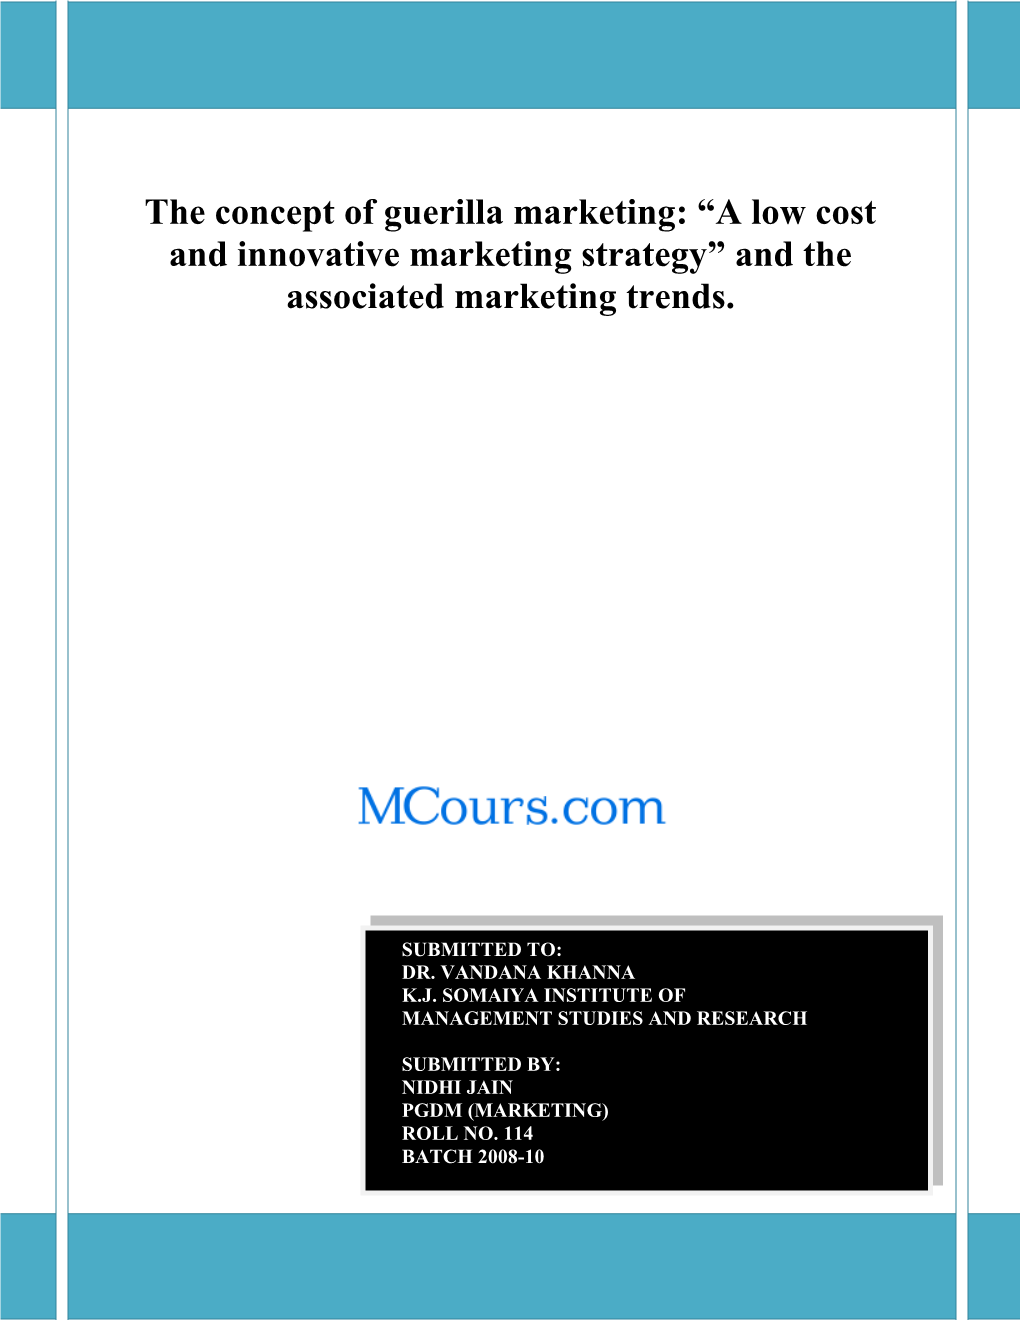 The Concept of Guerilla Marketing: “A Low Cost and Innovative Marketing Strategy” and the Associated Marketing Trends